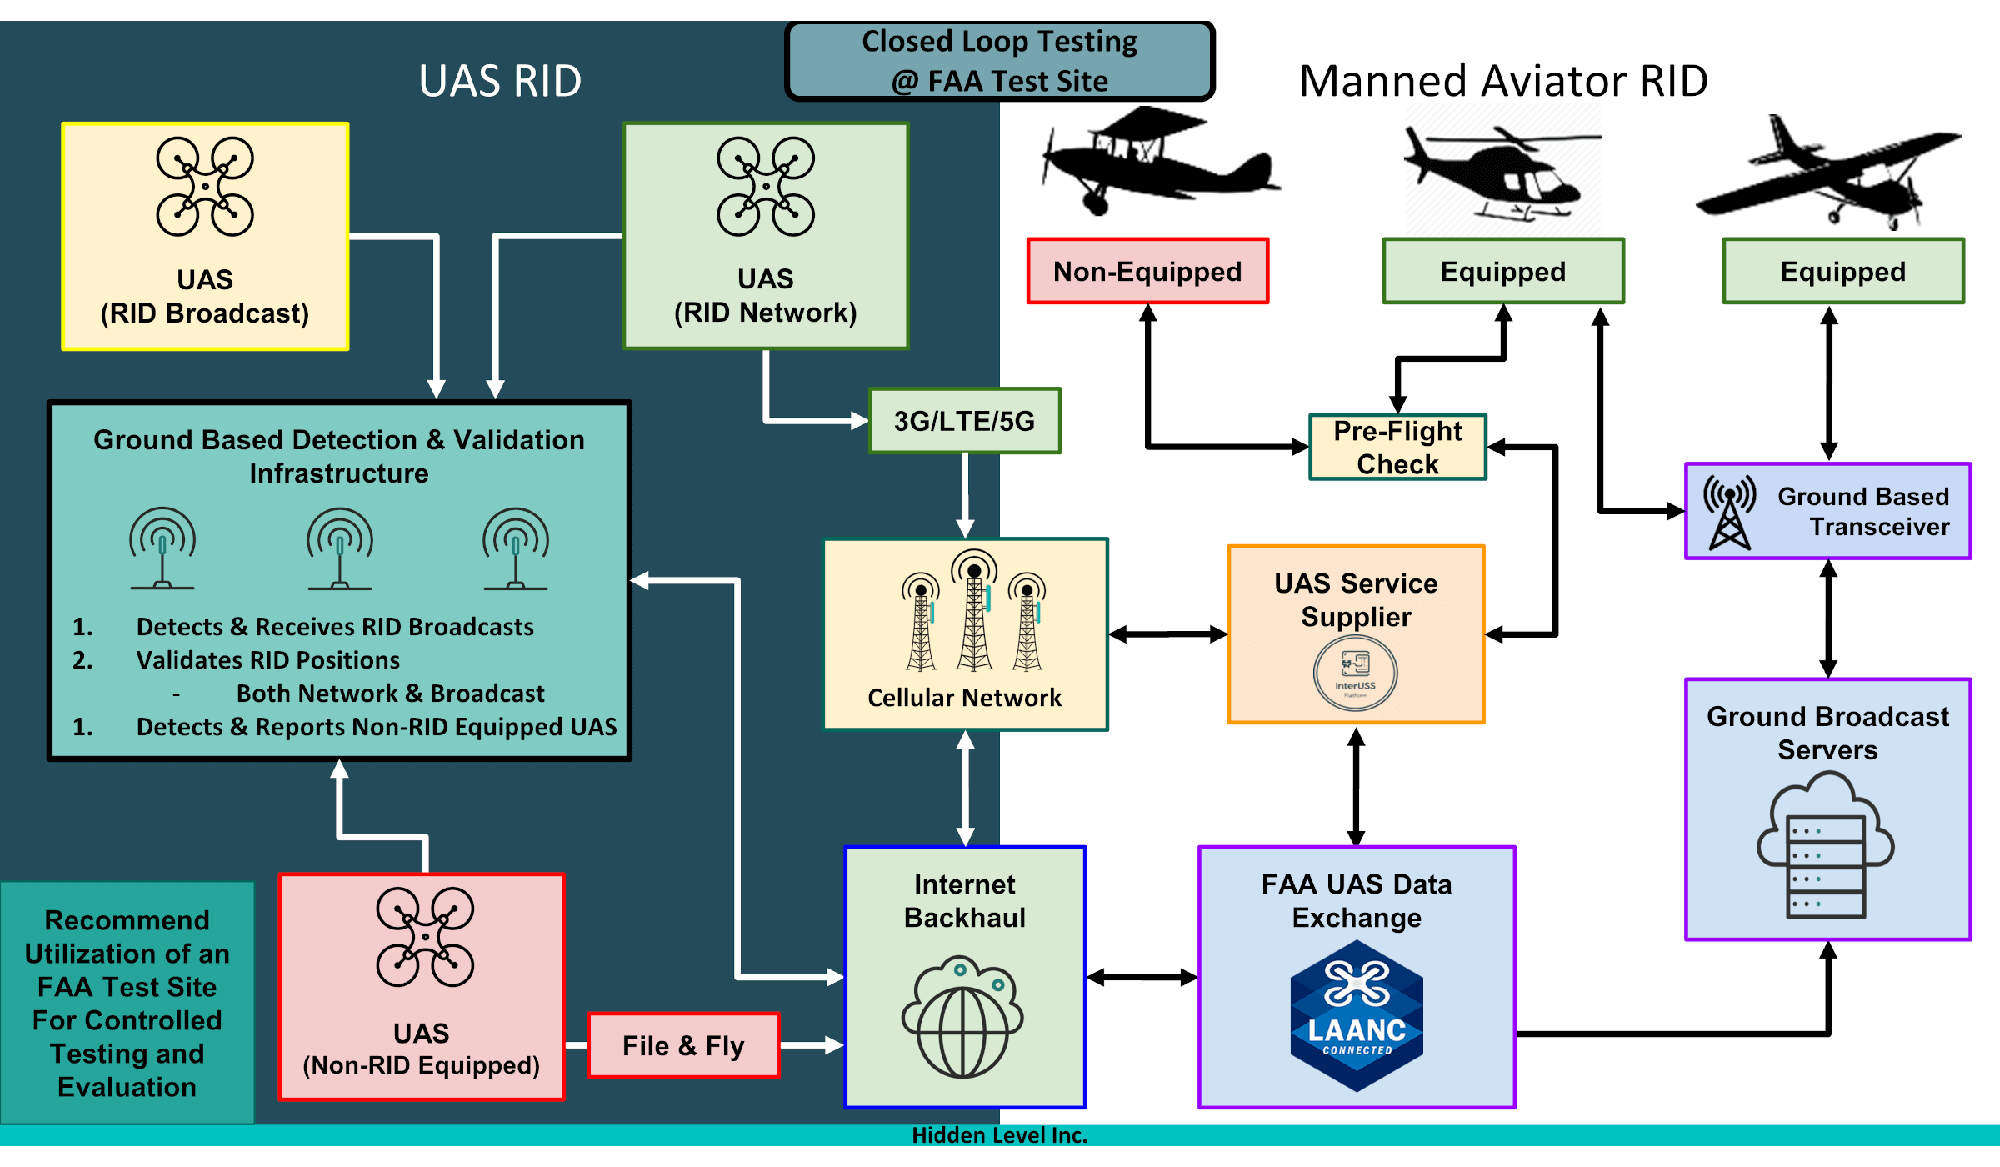 Remote ID For Manned Aviators Closed Loop Testing Concept